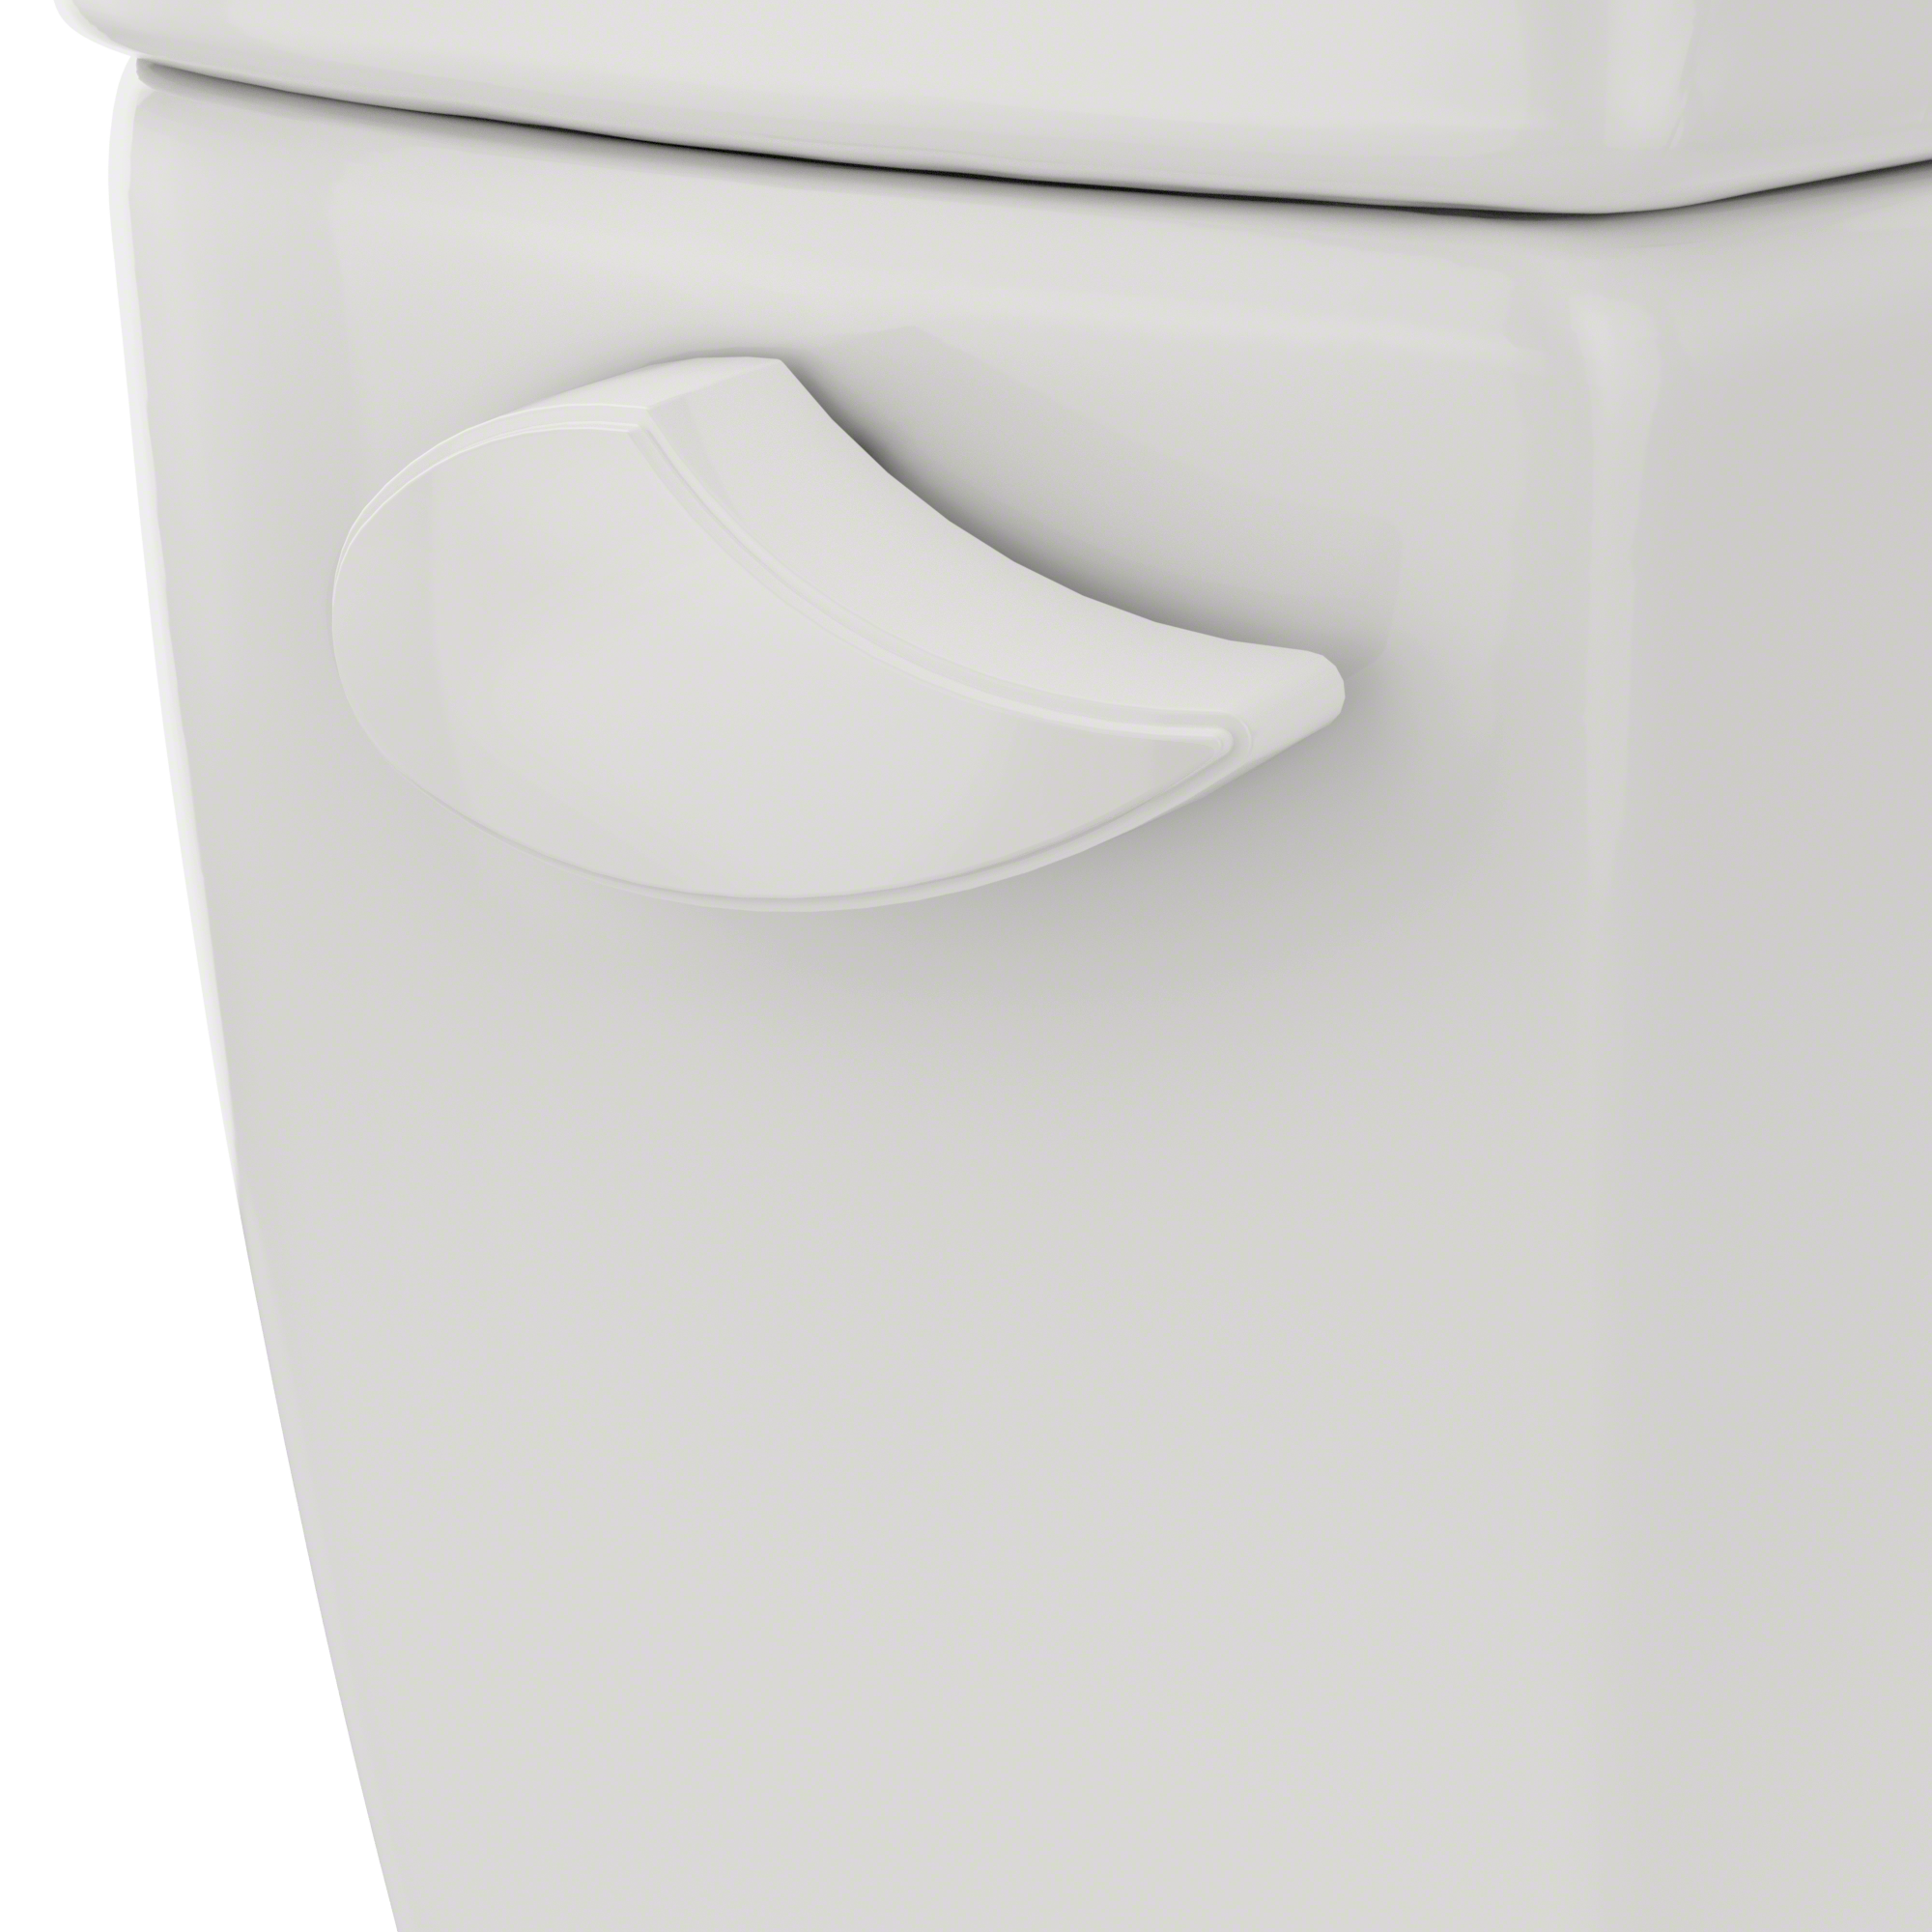 Toto®Trip Lever - Colonial White For Drake (Except R Suffix) Toilet-THU068#11